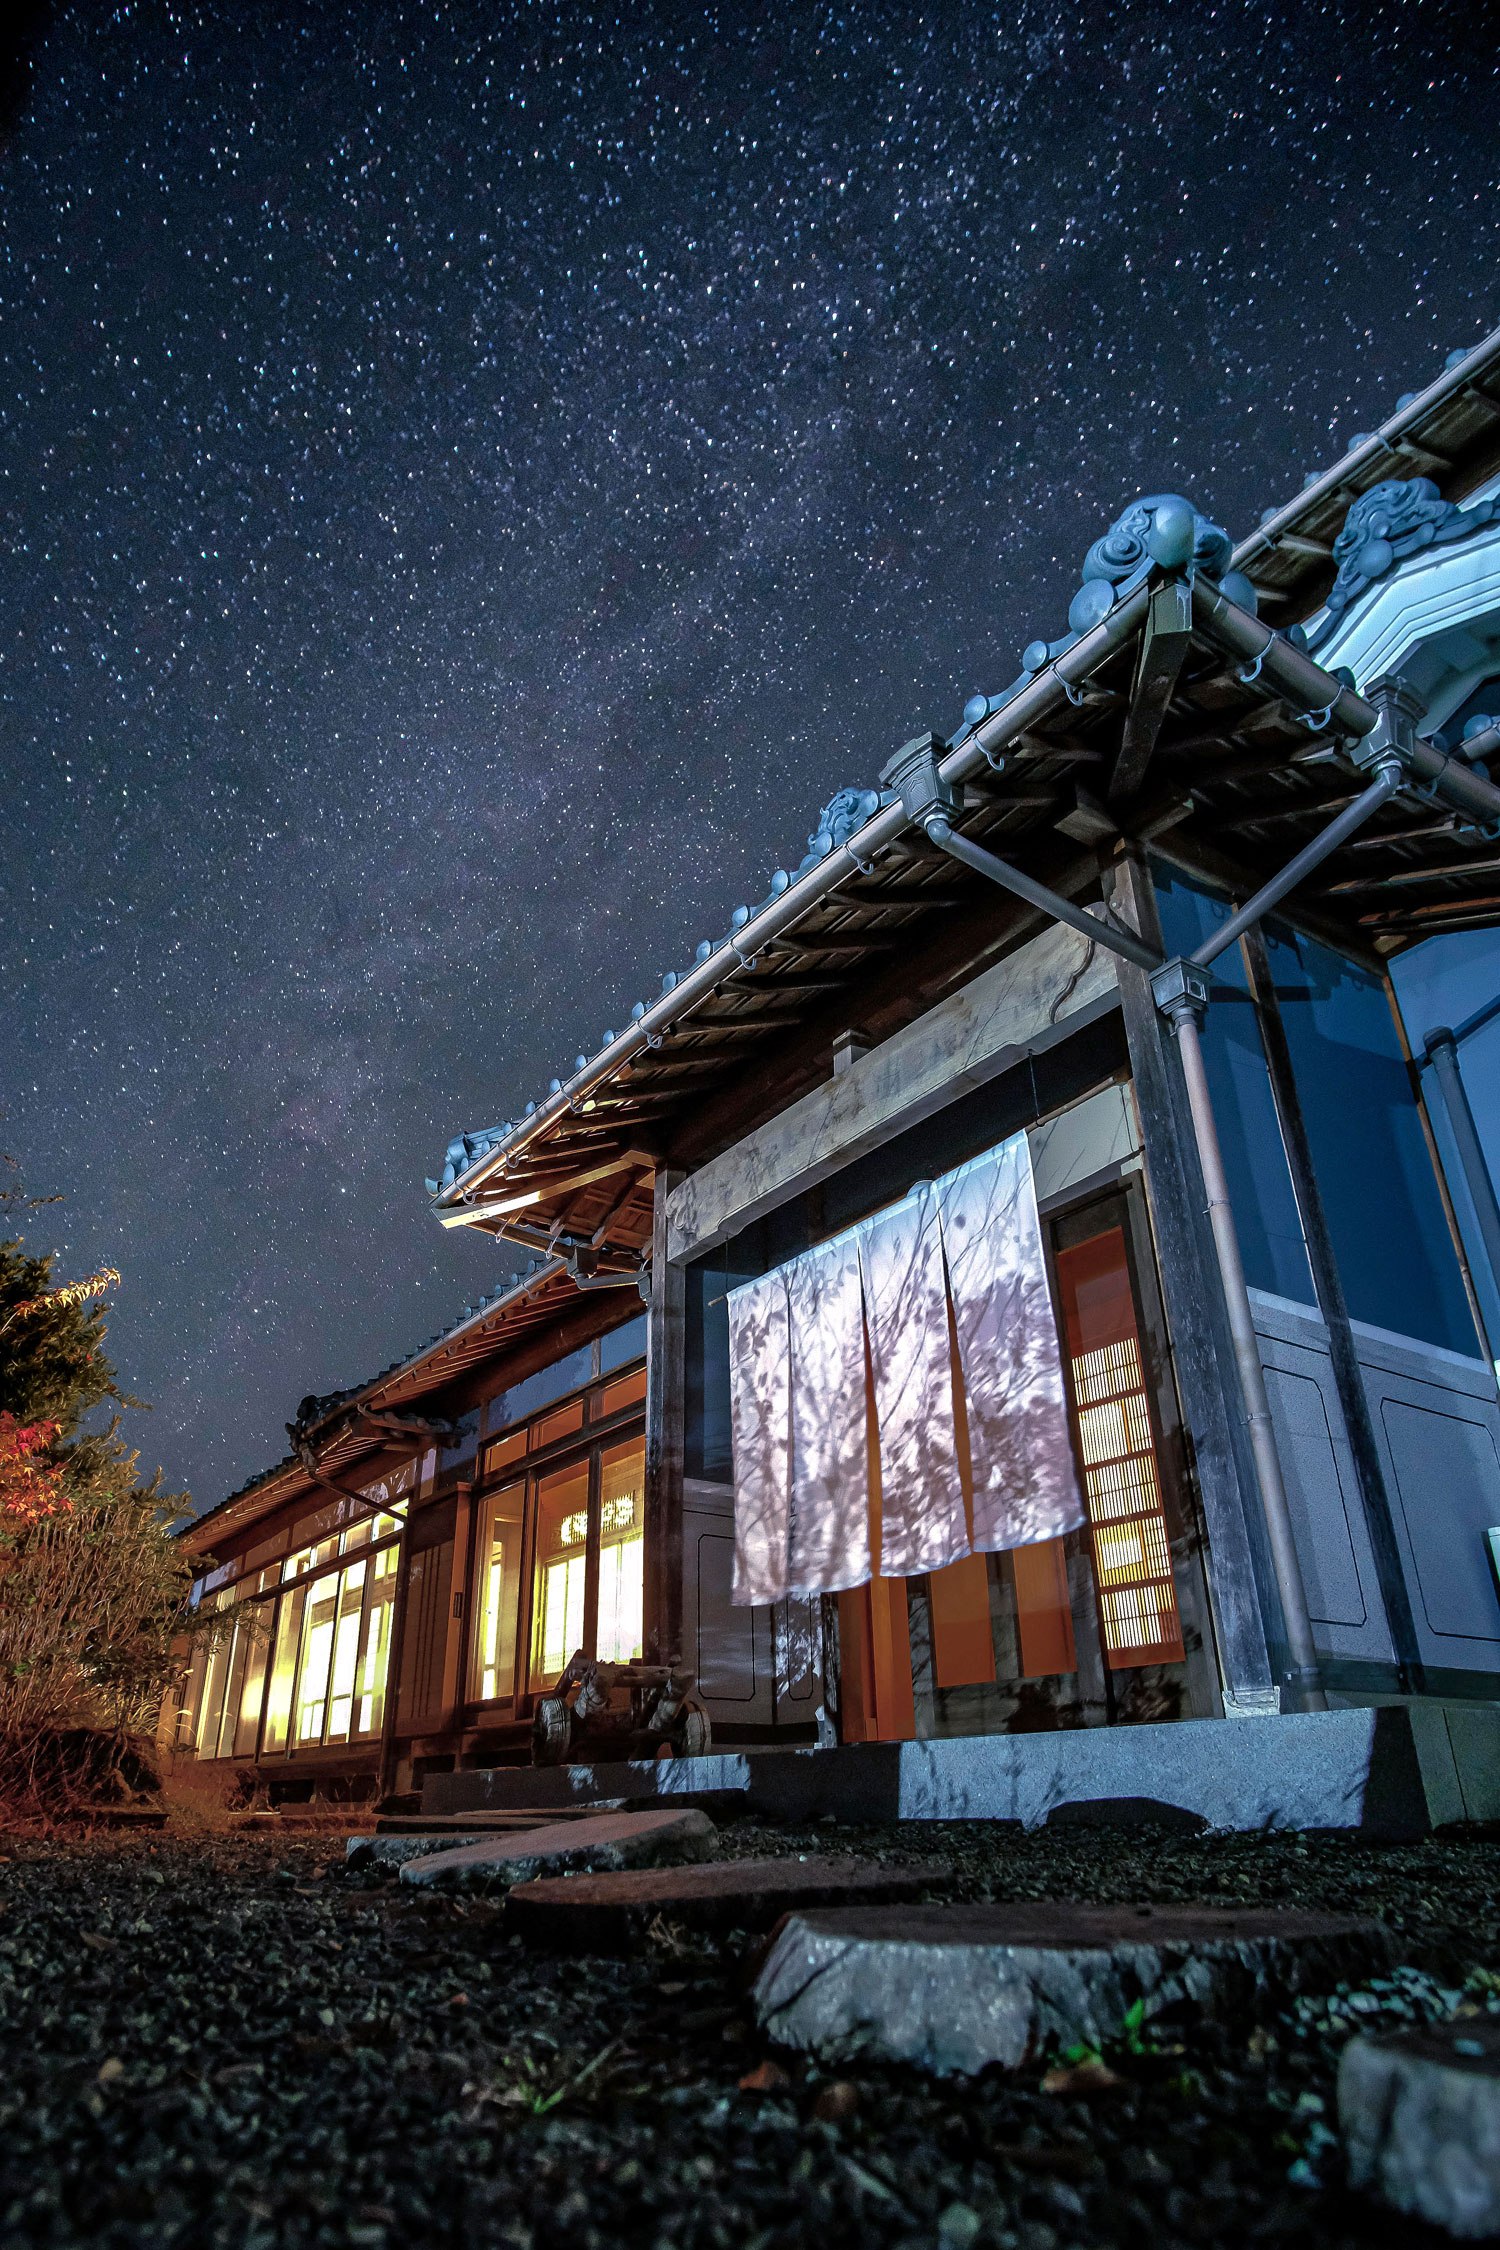 Hoshi to kaze no Niwa　The sky full of stars seen from the 600 square meter garden